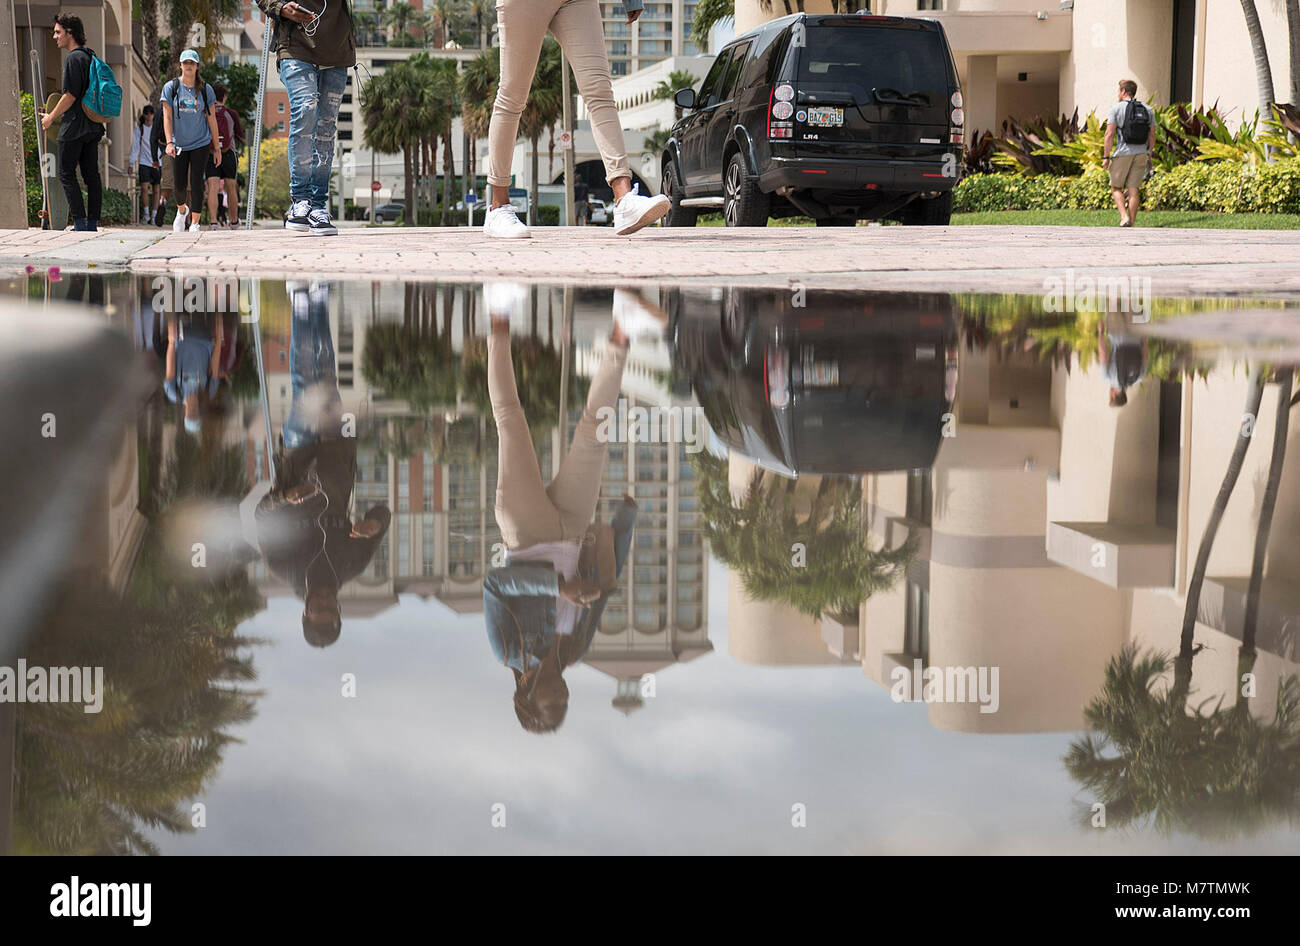 March 12, 2018 - West Palm Beach, Florida, U.S. - Passers-by on Vallowe Court on the Palm Beach Atlantic University campus walk past their reflections in a puddle after an afternoon shower in West Palm Beach, Fla., on Monday, March 12, 2018. (Credit Image: © Andres Leiva/The Palm Beach Post via ZUMA Wire) Stock Photo